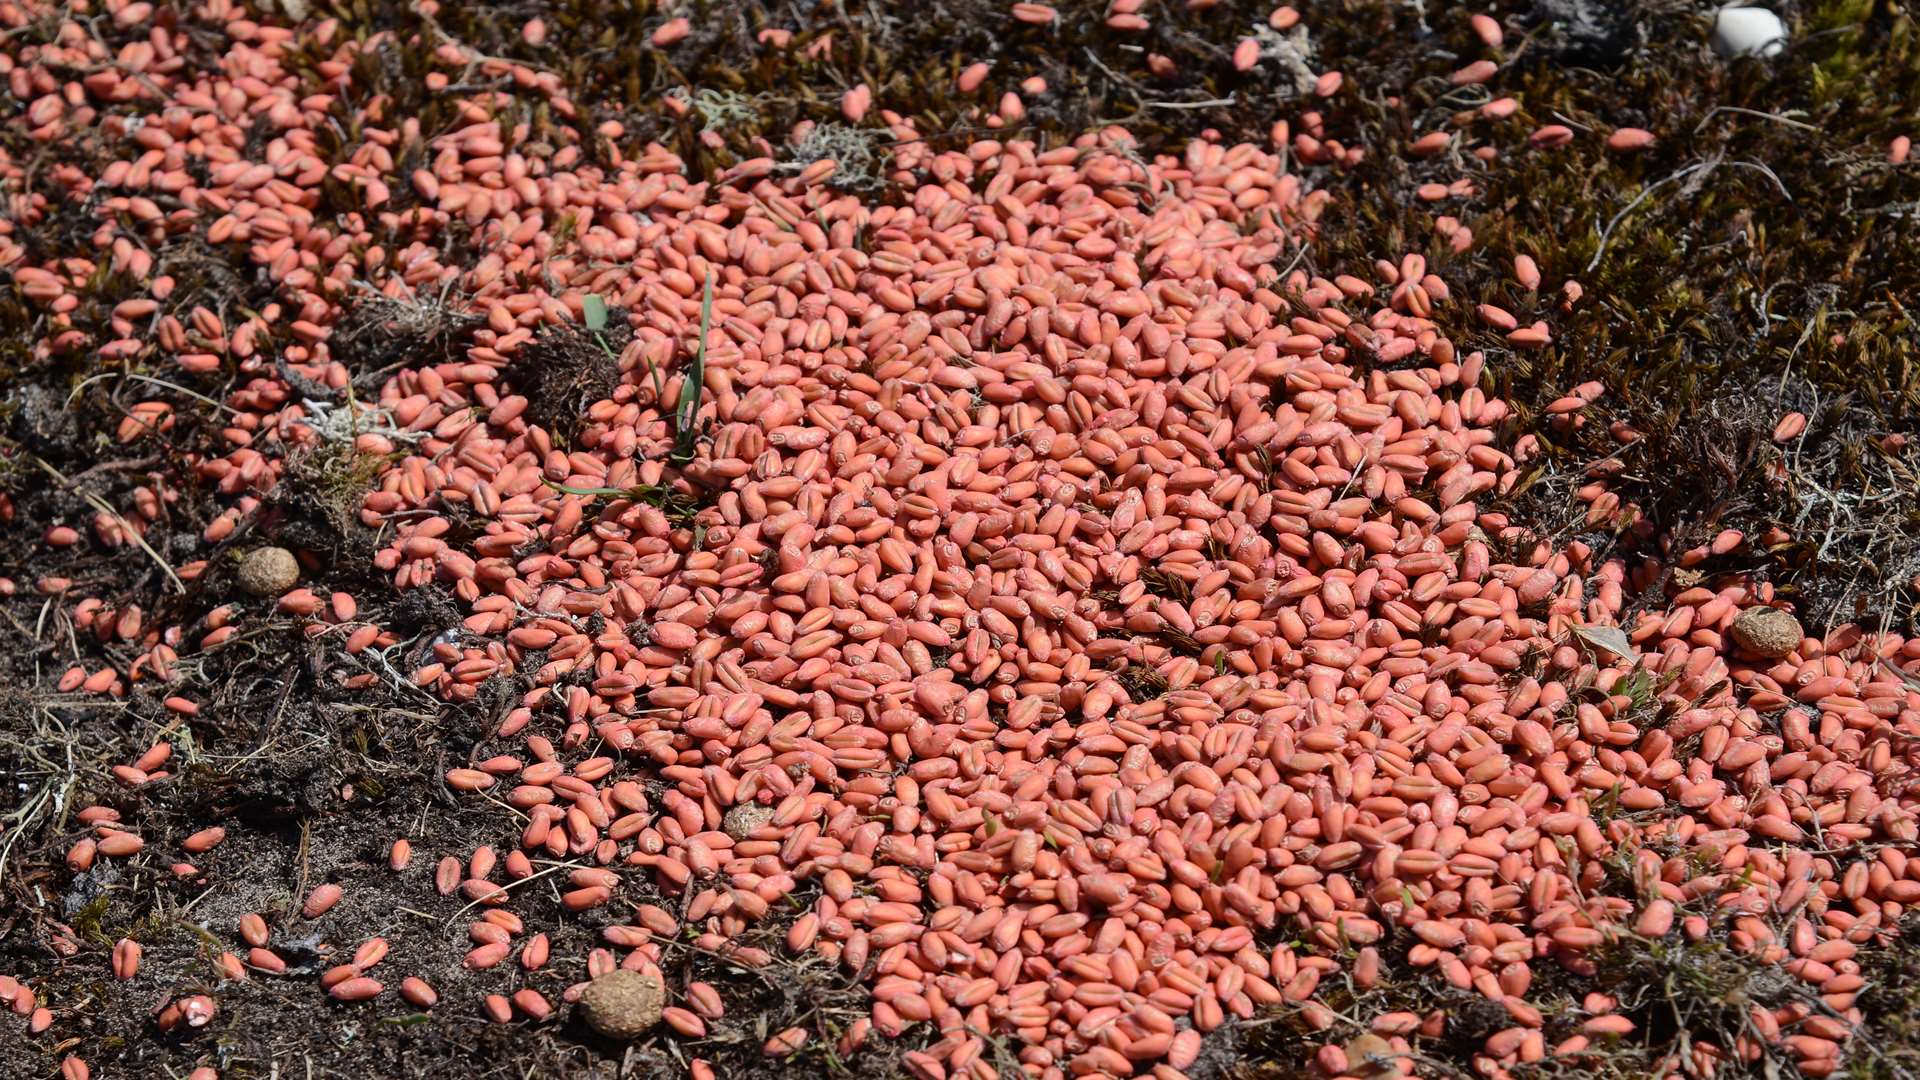 The pesticide-treated seeds, dyed red, found at Lydd.